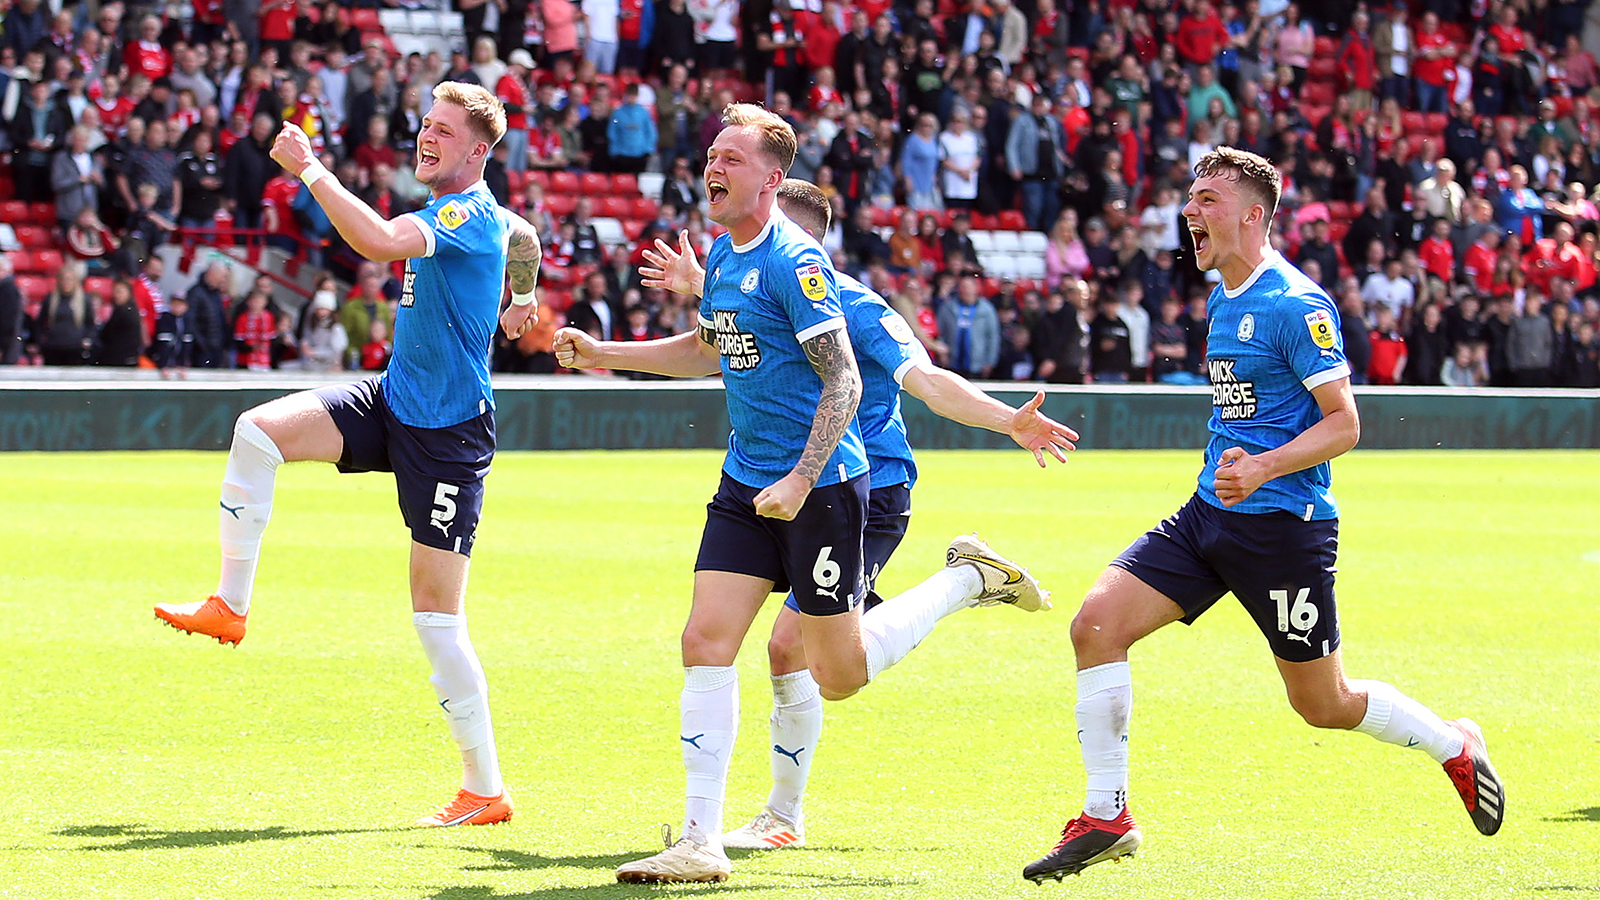 The players celebrate the win at Barnsley